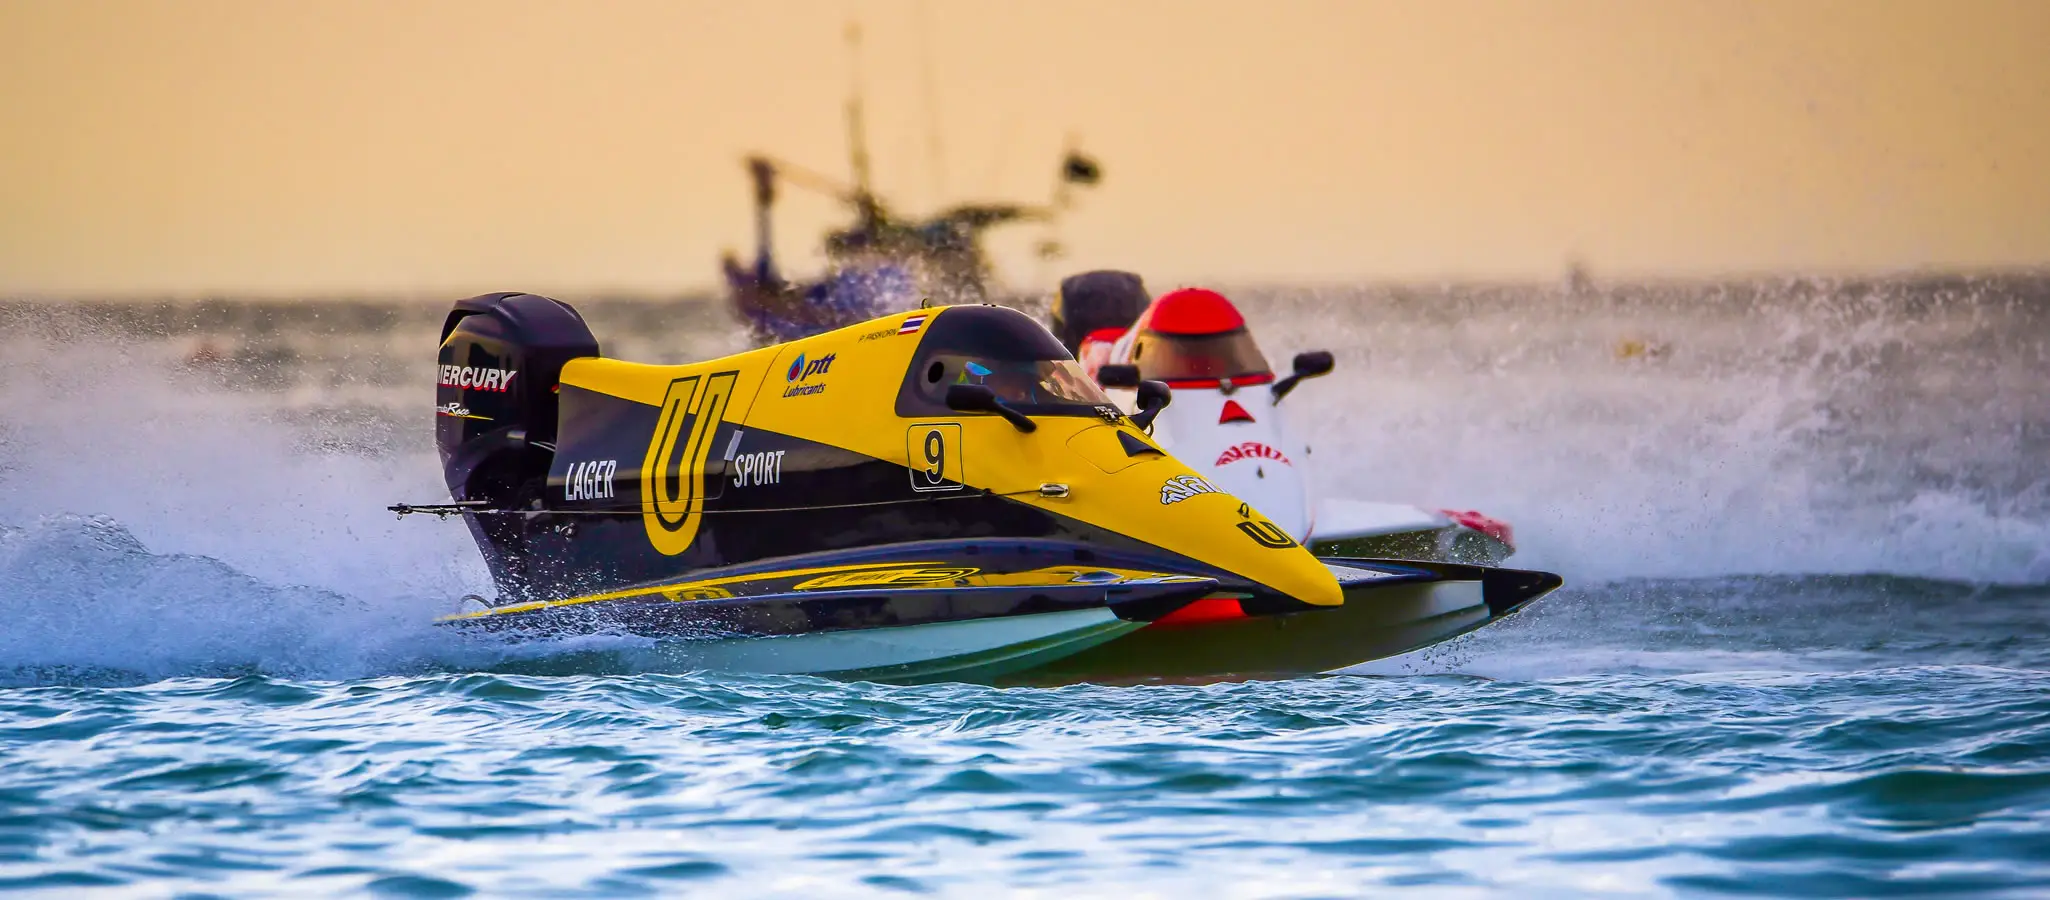 Quote Sports Insurance - Powerboat Racing Injury Insurance